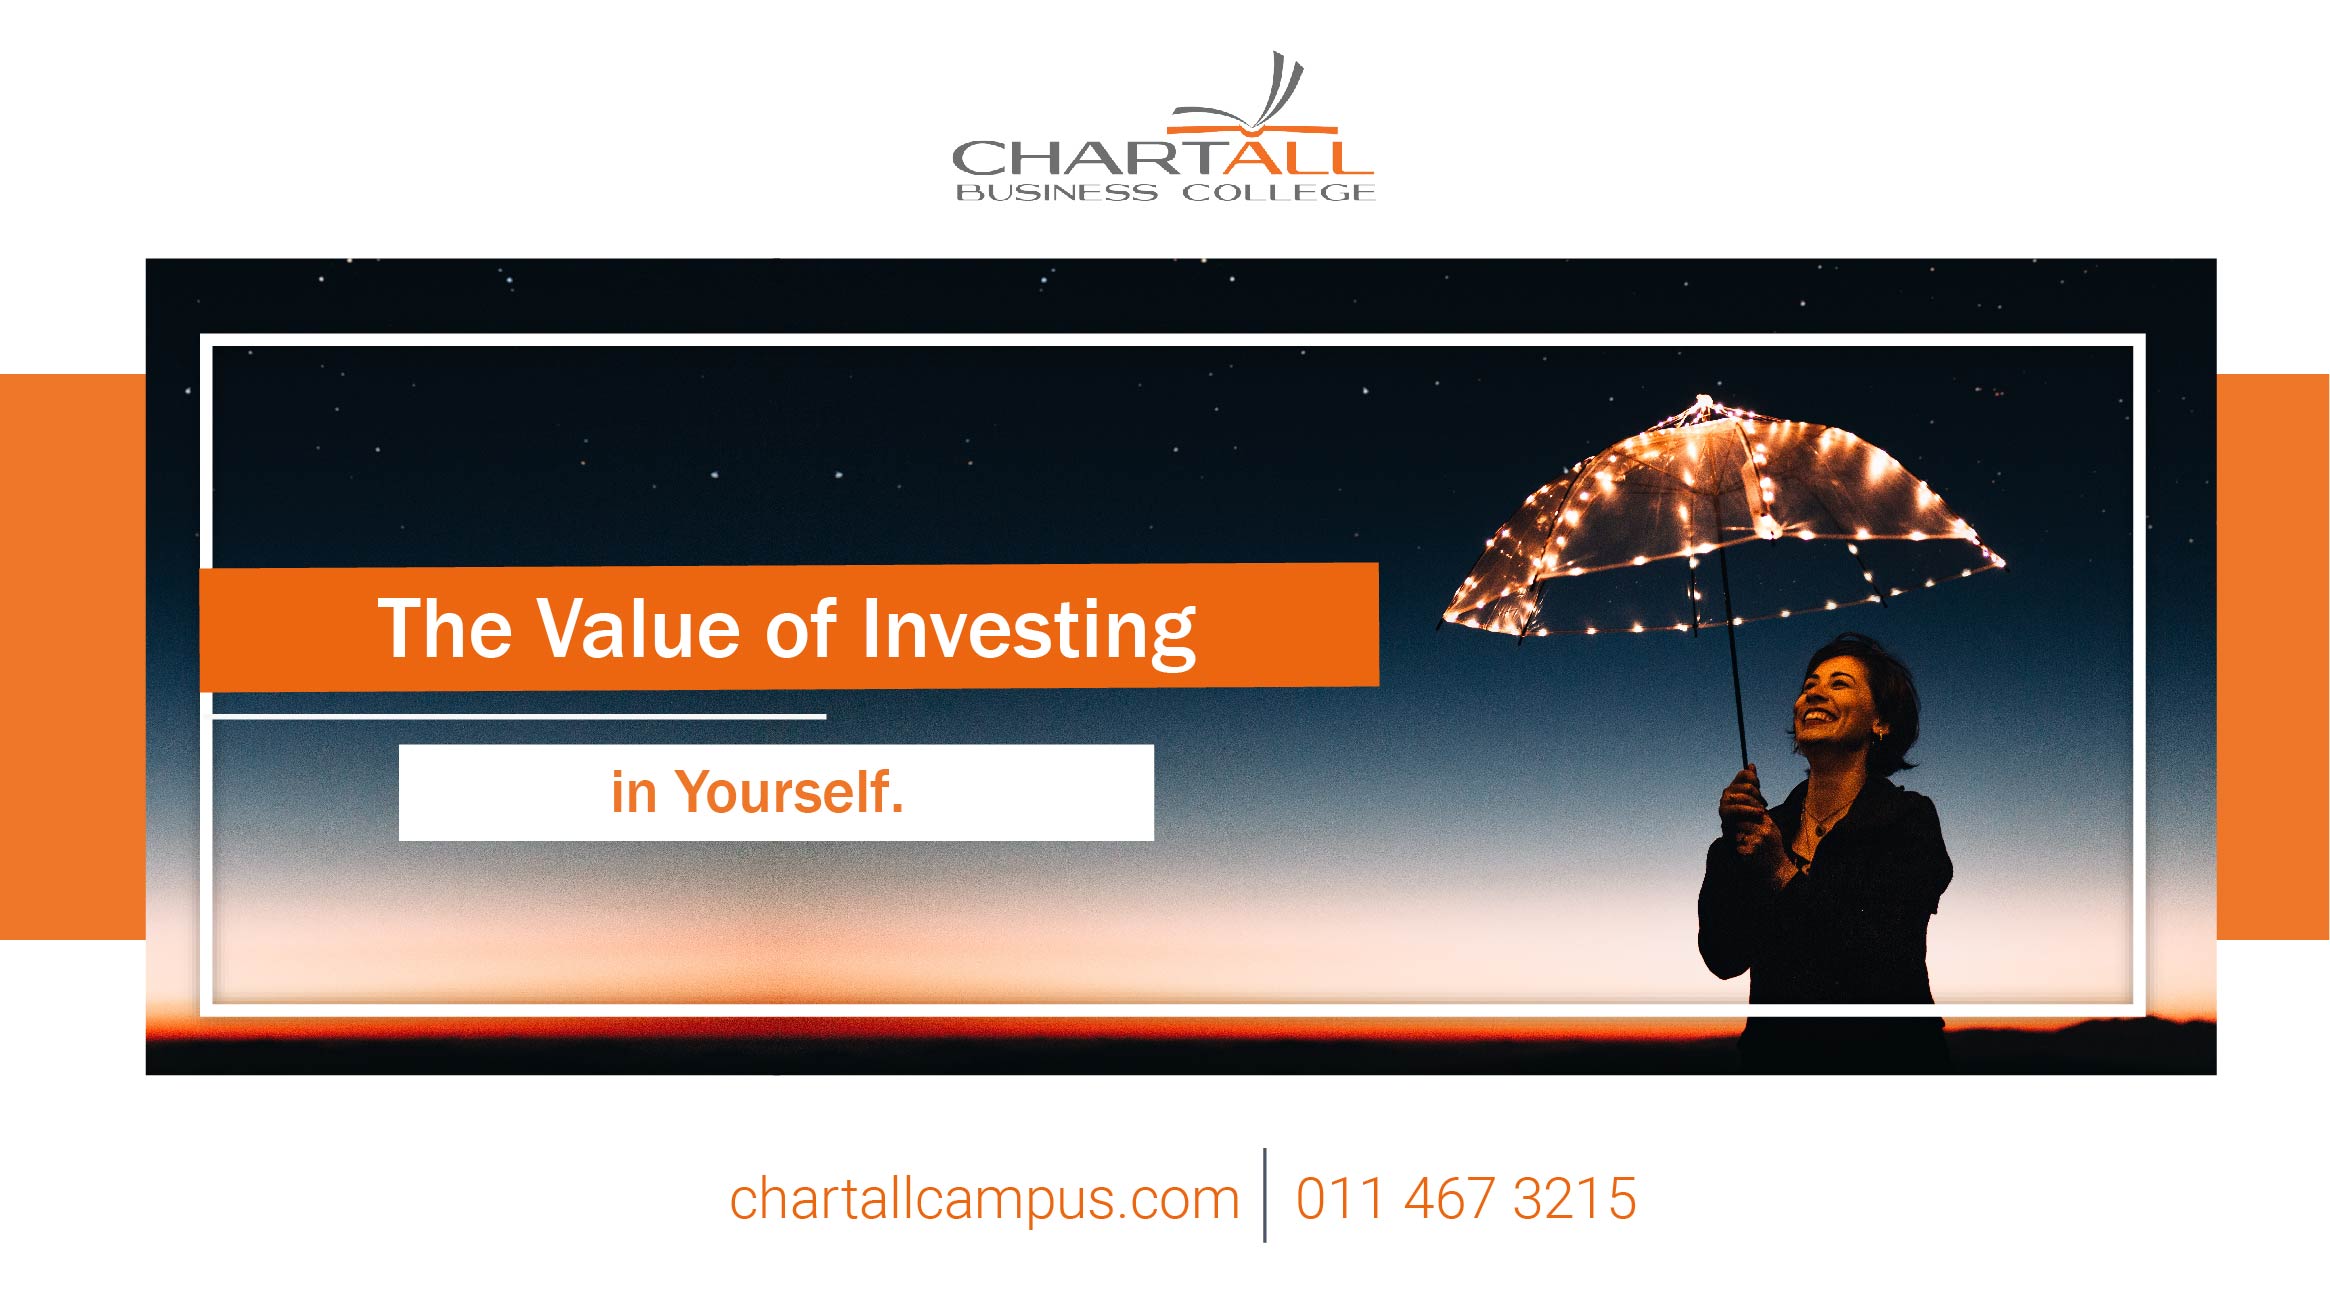 The Value of Investing in Yourself